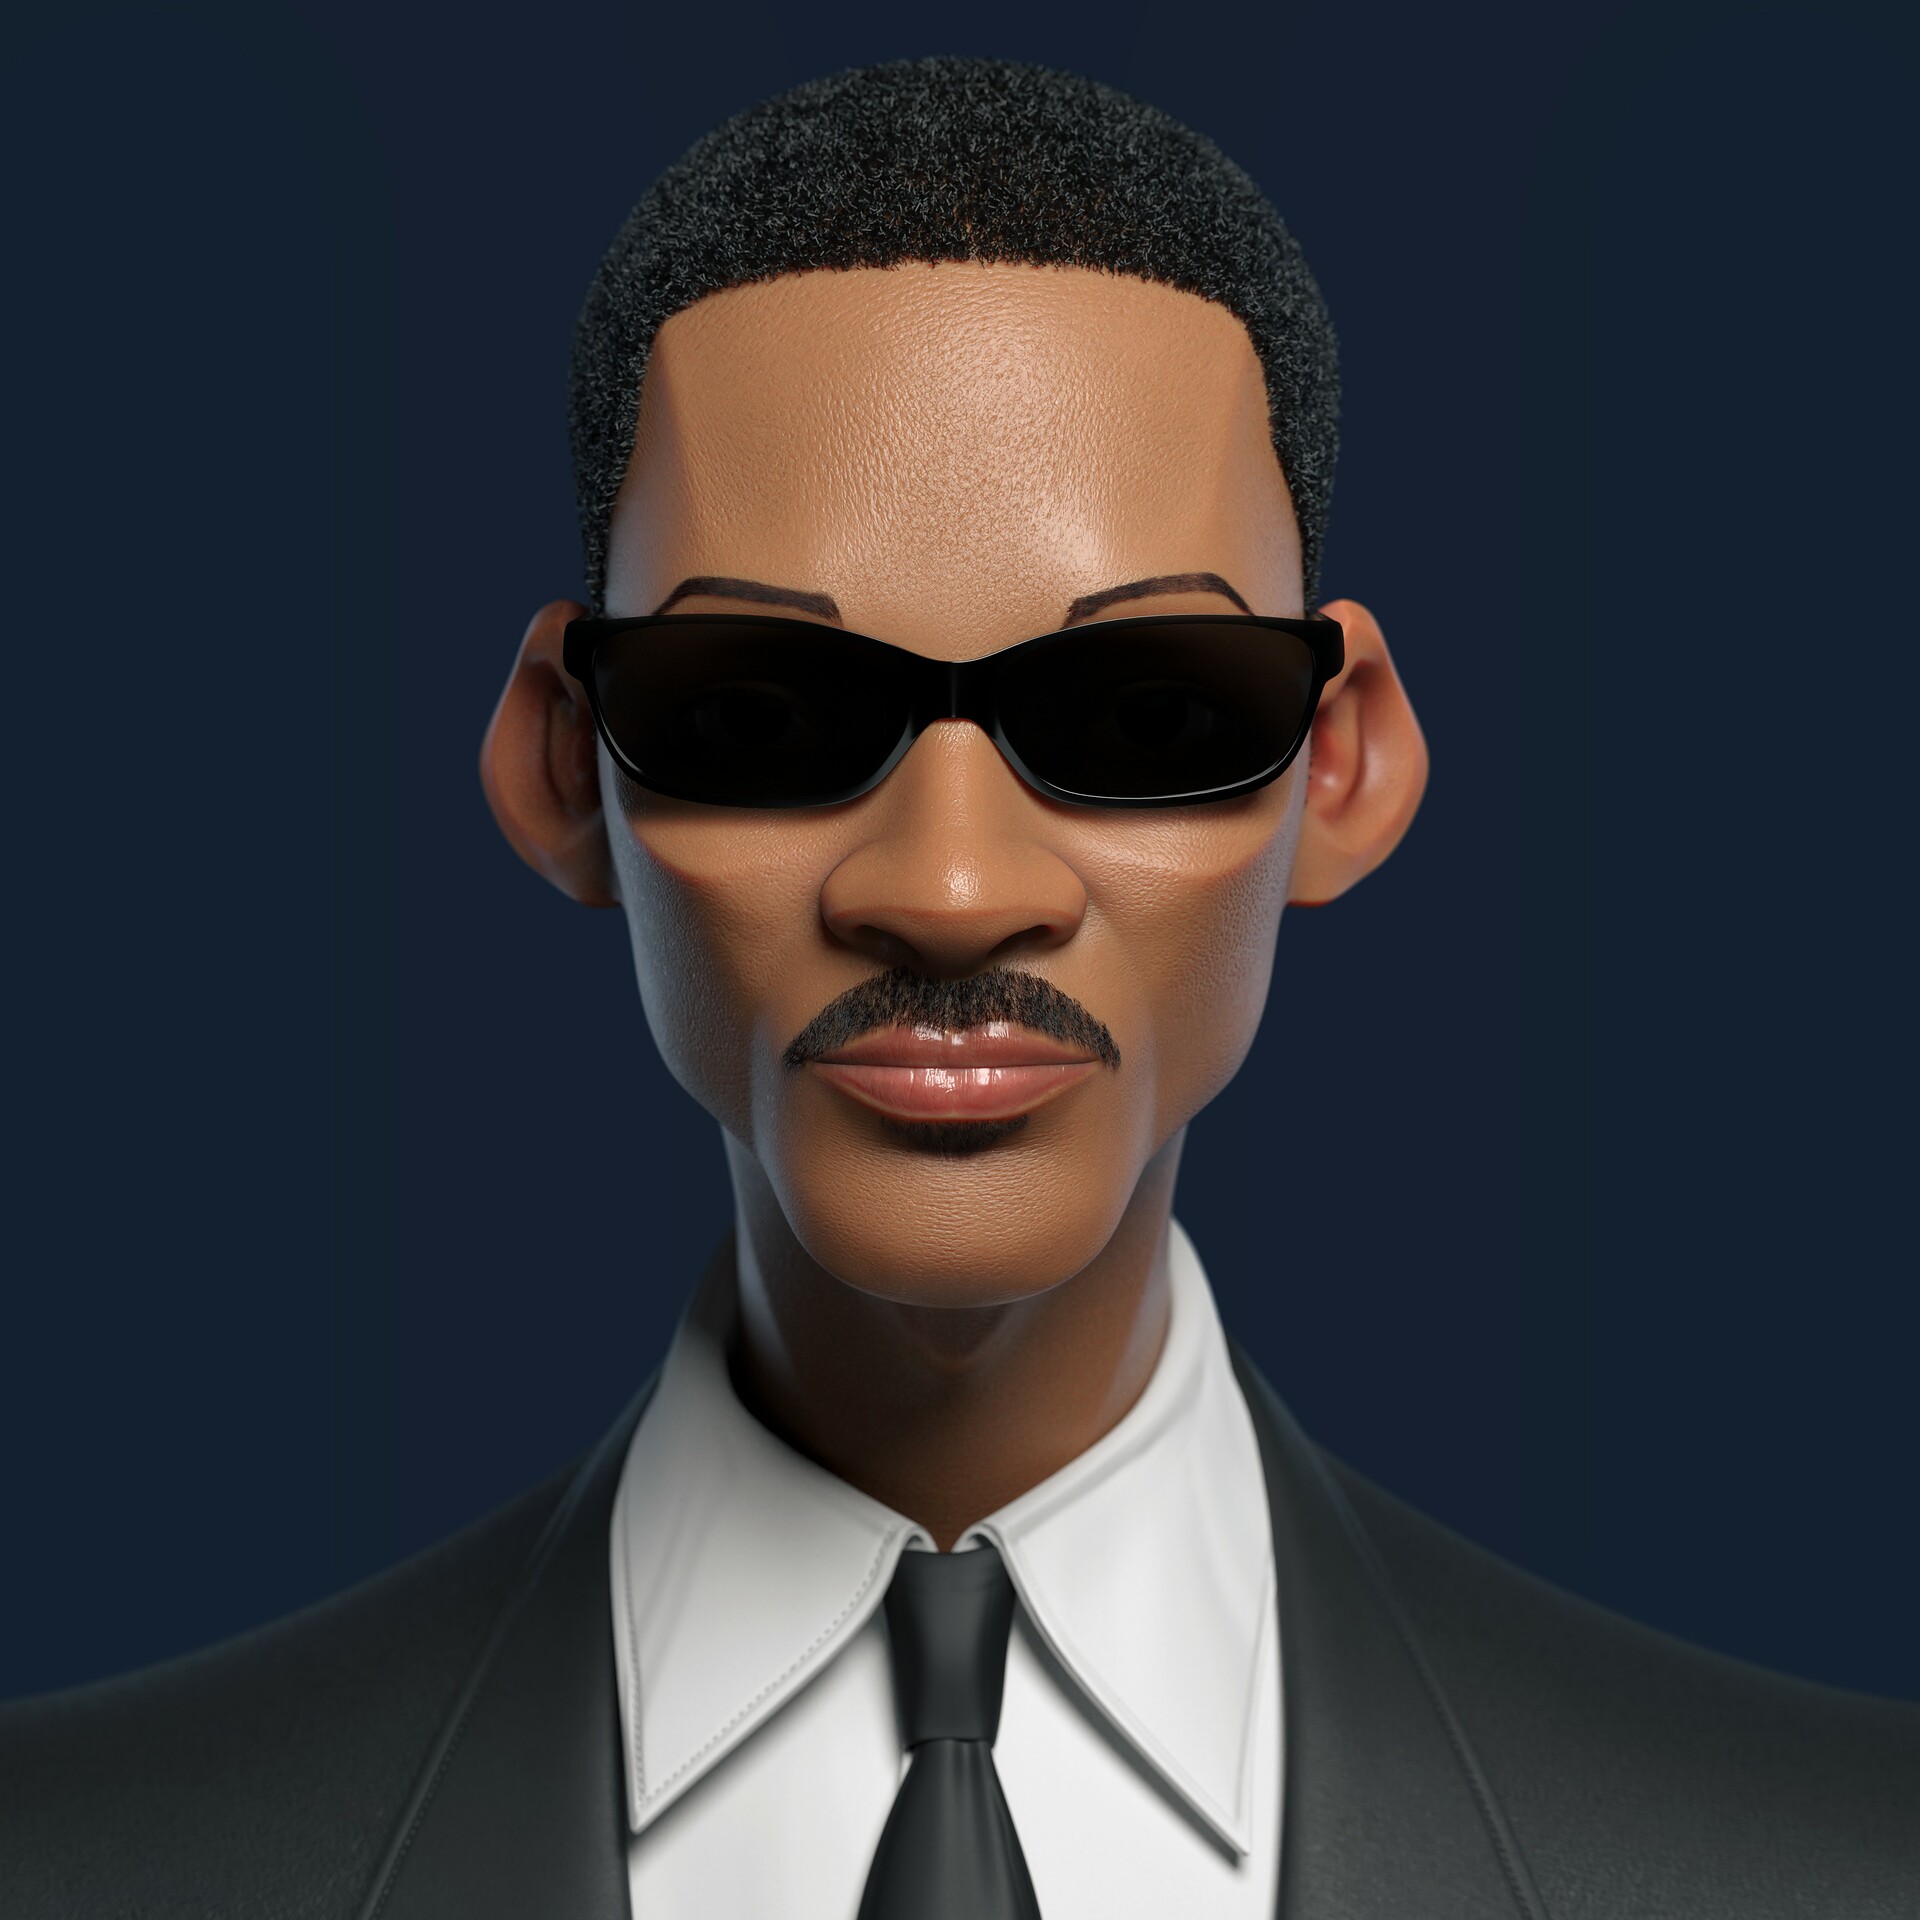 25 Facts About Agent J (Men In Black: The Series) - Facts.net